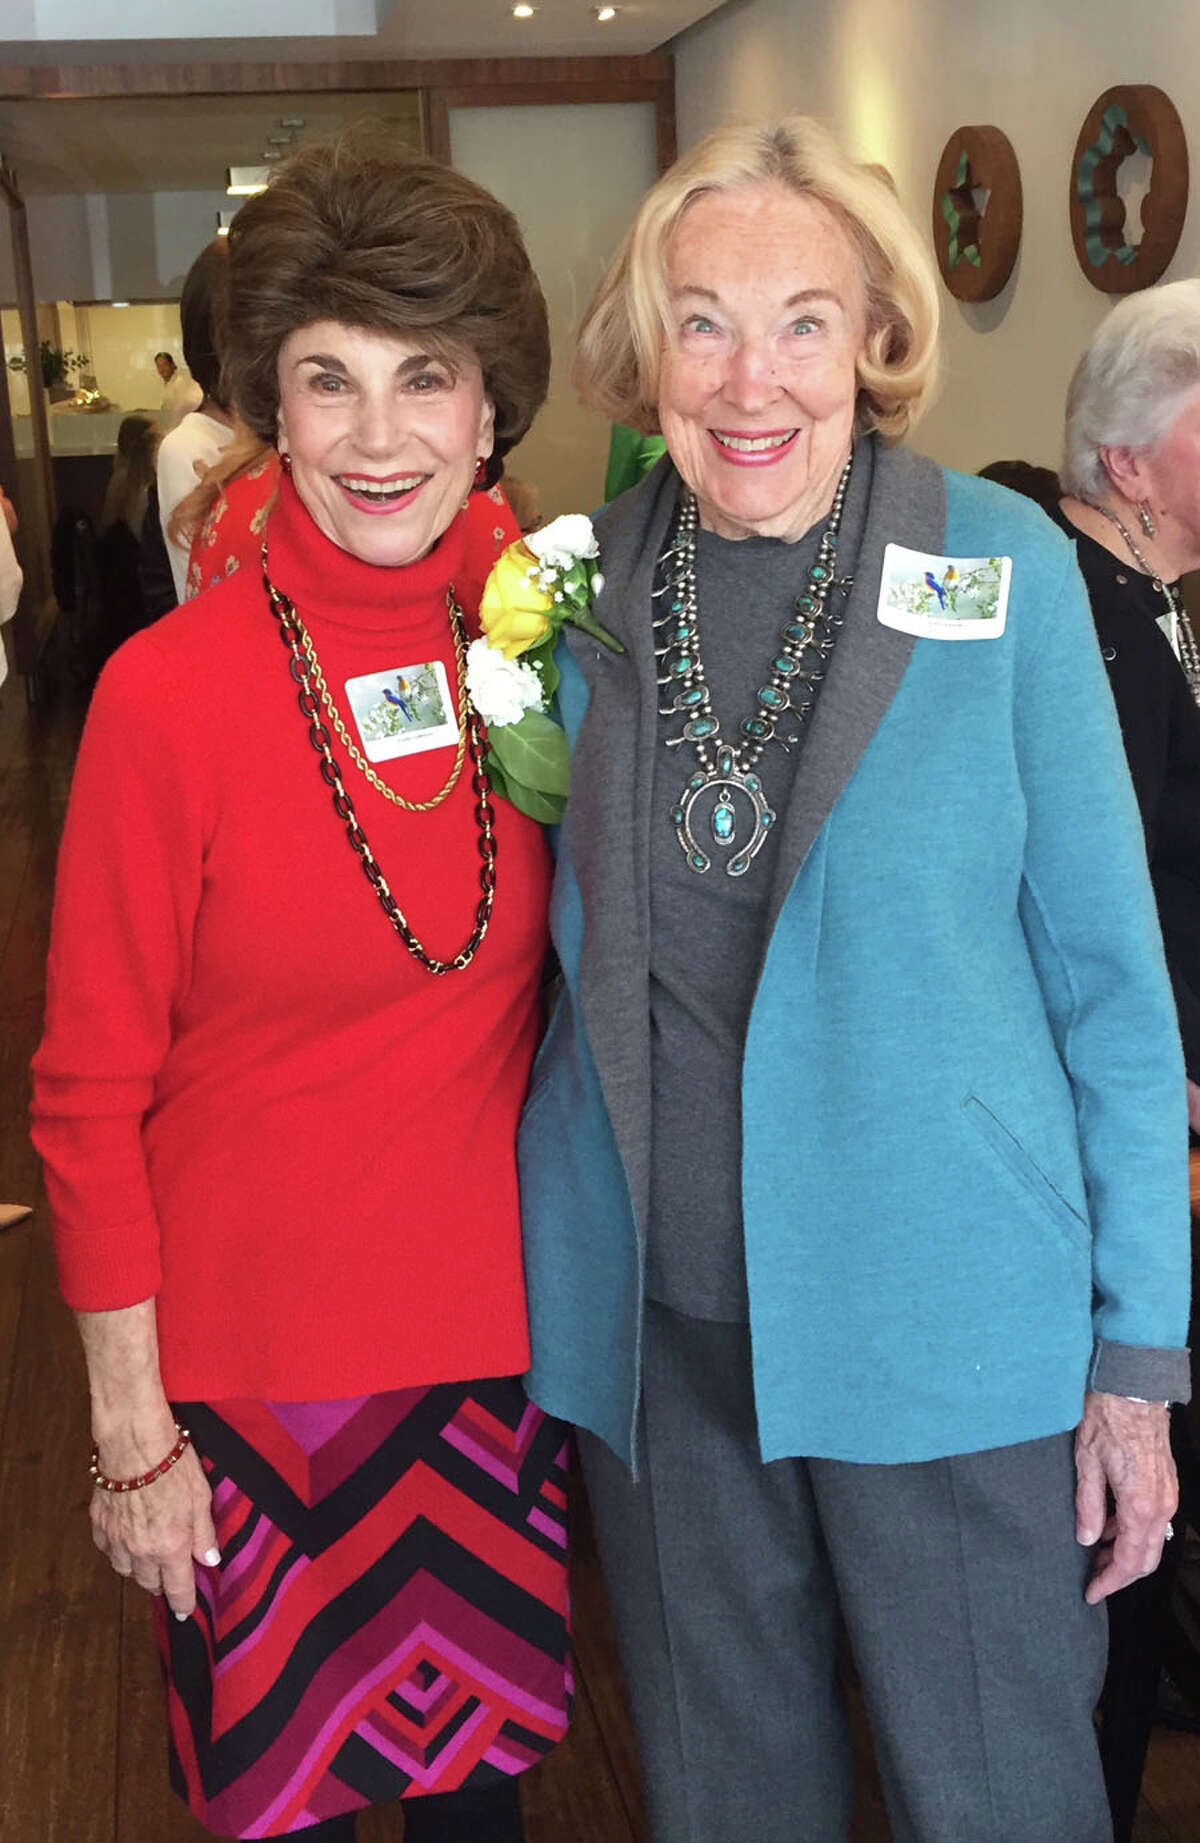 The Congregational Church of New Canaan's Spring Luncheon on April 1, 2019 shined light on "Women of Wisdom." Parry Grogan and Linda Maranis attend The Congregational Church of New Canaan's Spring Luncheon on April 1, 2019. — First Congregational Church of New Canaan / Contributed photo